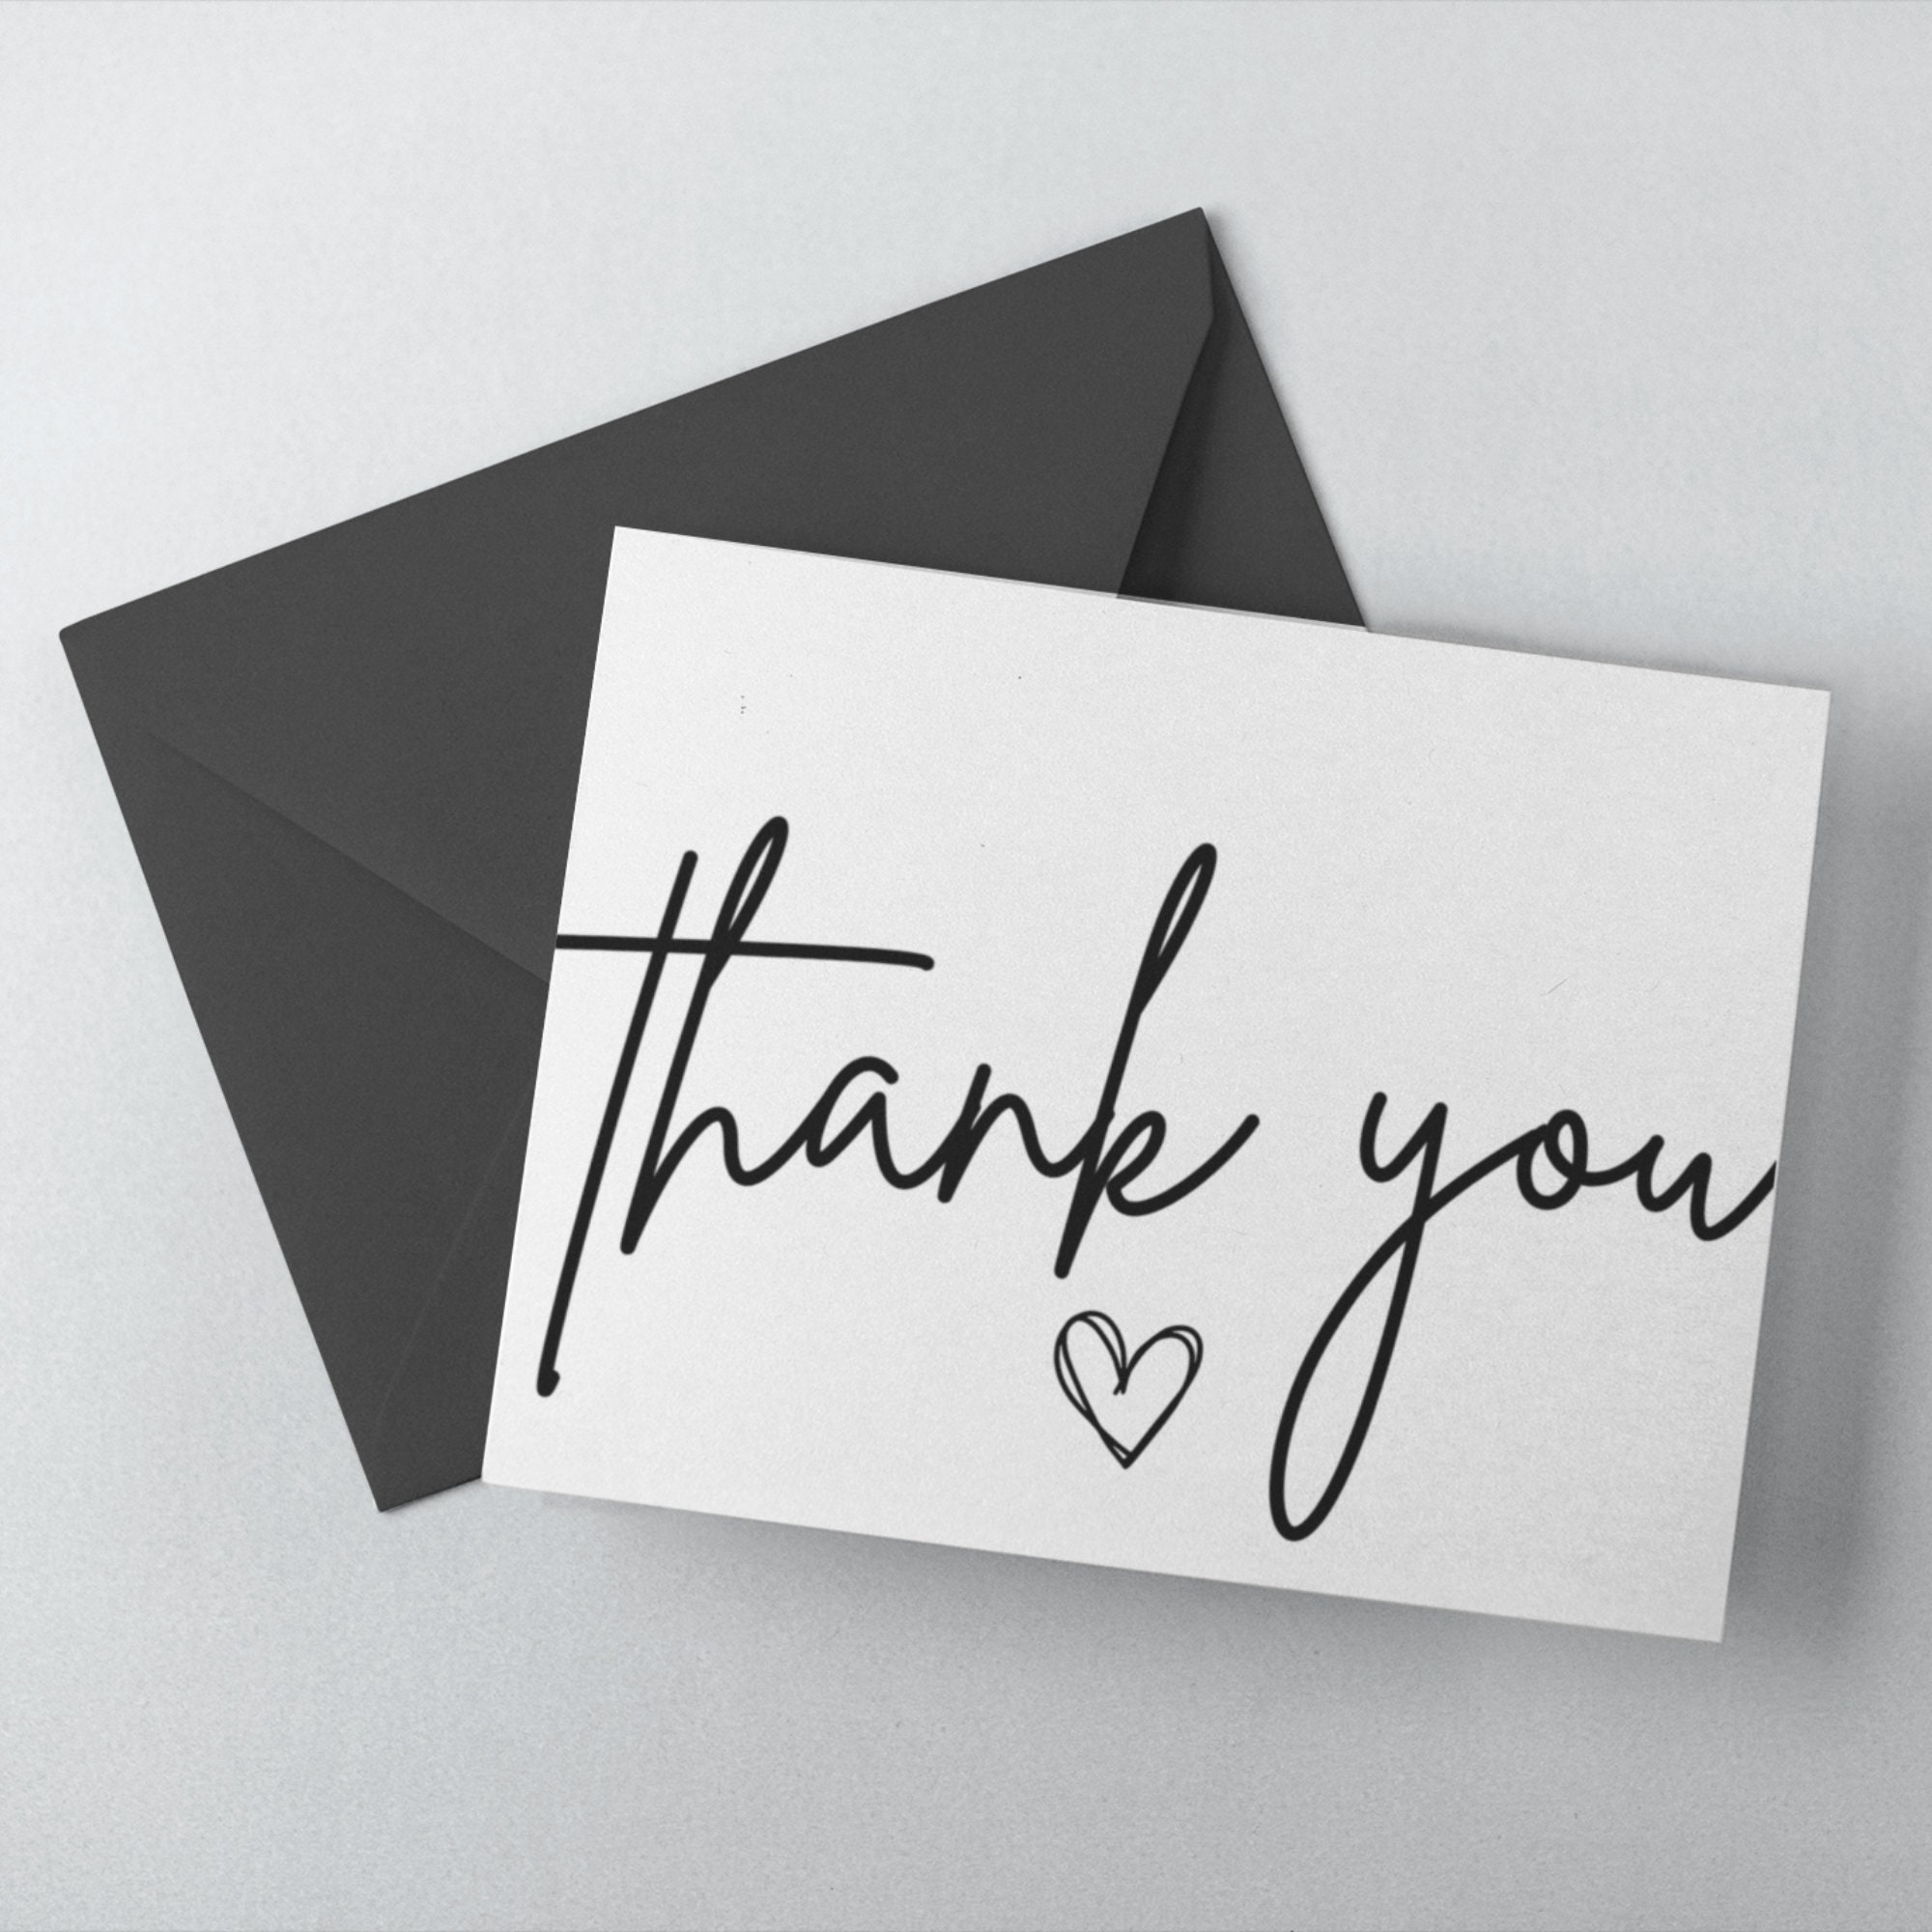 Small Thank You Cards Business Card Size (2X3,5) Mini Thank You Note Cards, Simple Elegant Design, Thick Cardstock, Blank Backside for Notes, Gift